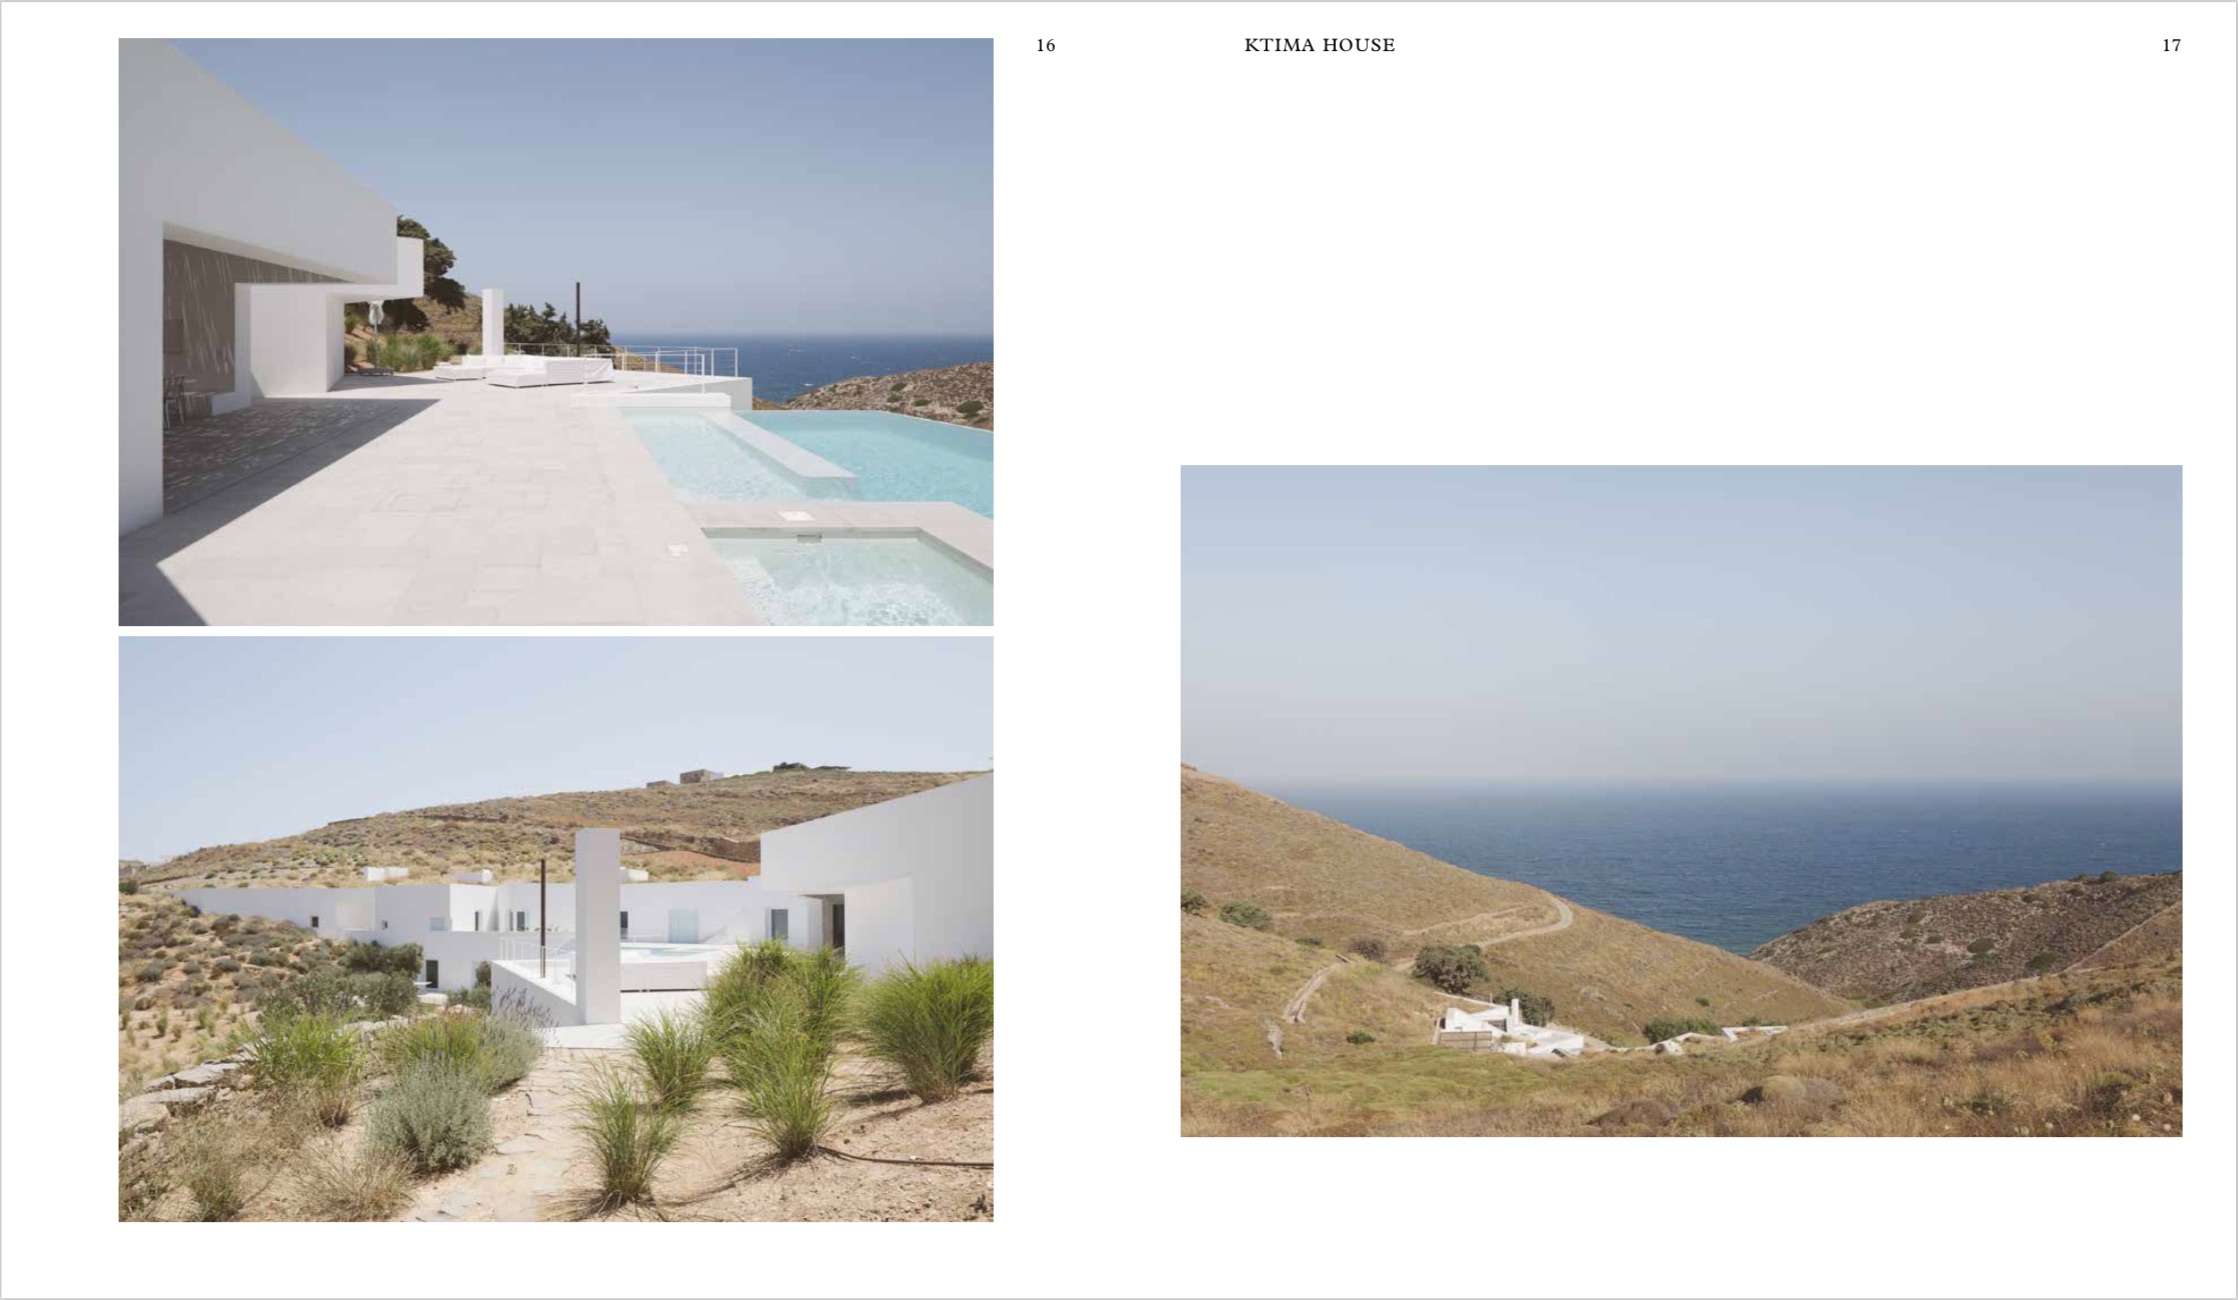 By Phaidon Editors from Living on Water: Contemporary Houses Framed by Water copyright Phaidon 2018